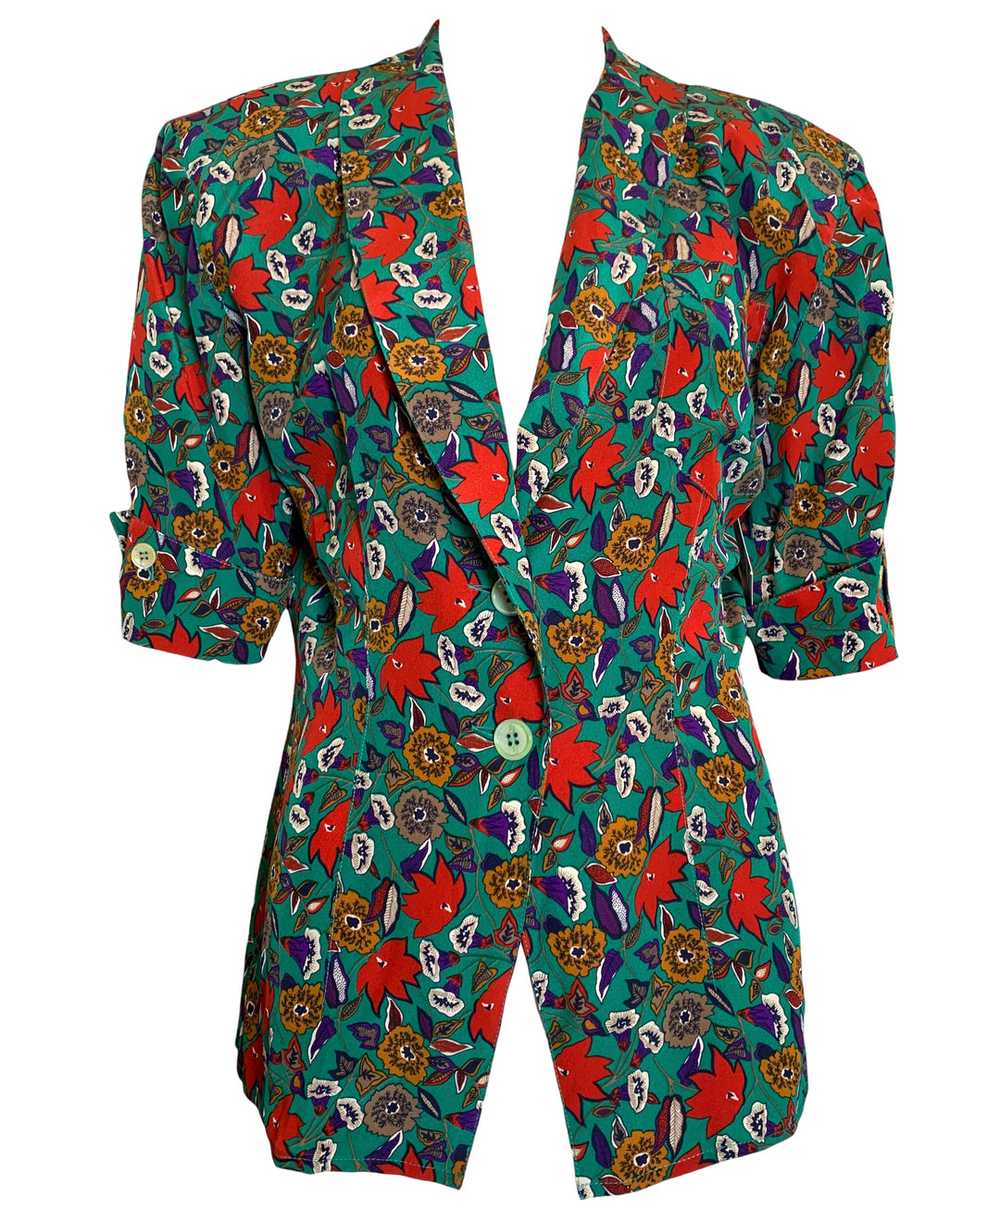 Gucci 80s Corporate Core Green Silk Floral Blouse - image 1